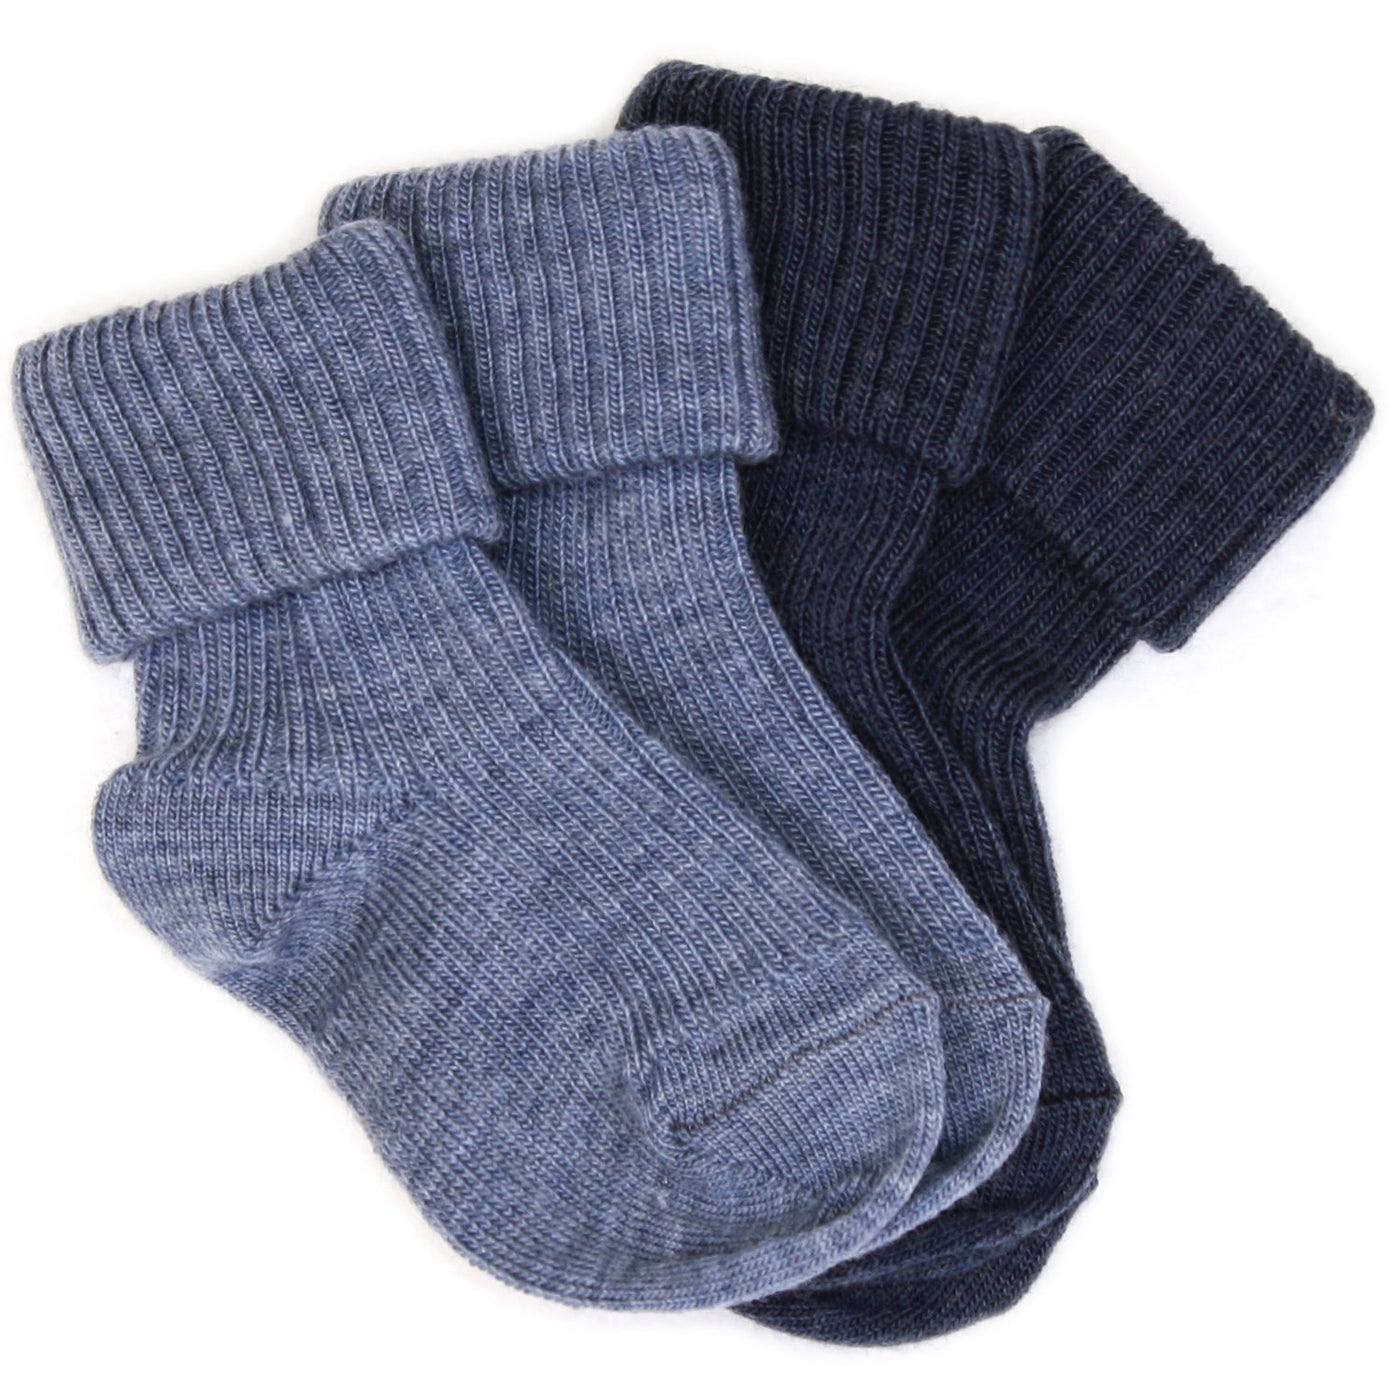 Imperfect Wool Socks, Baby and Toddler, Blue - TWO PAIR PACK (discontinued)